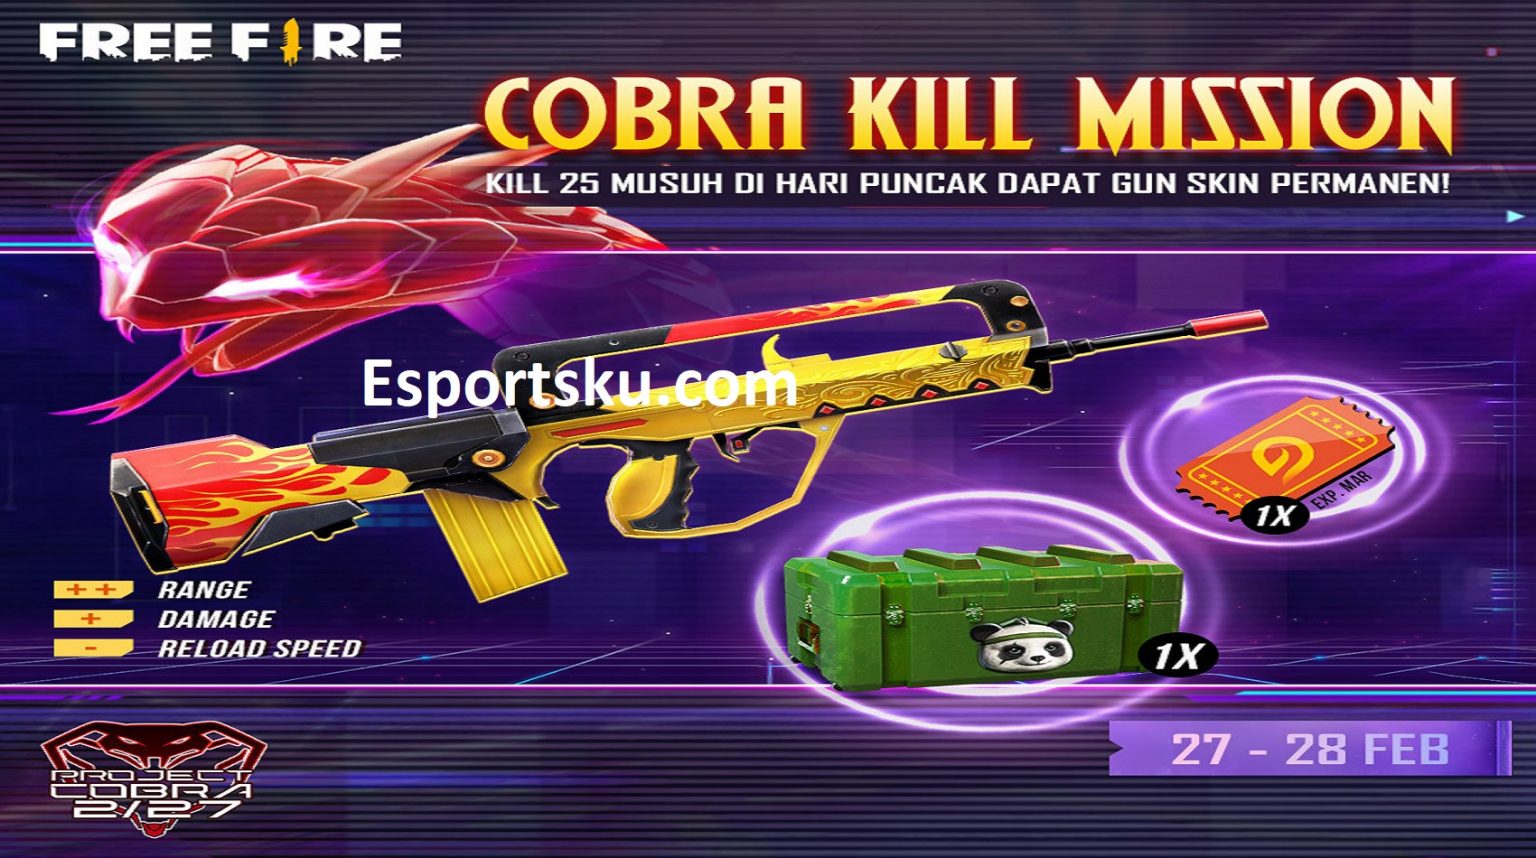 Cobra Kill Mission FF Can Skin Famas Swagger Free Fire ...